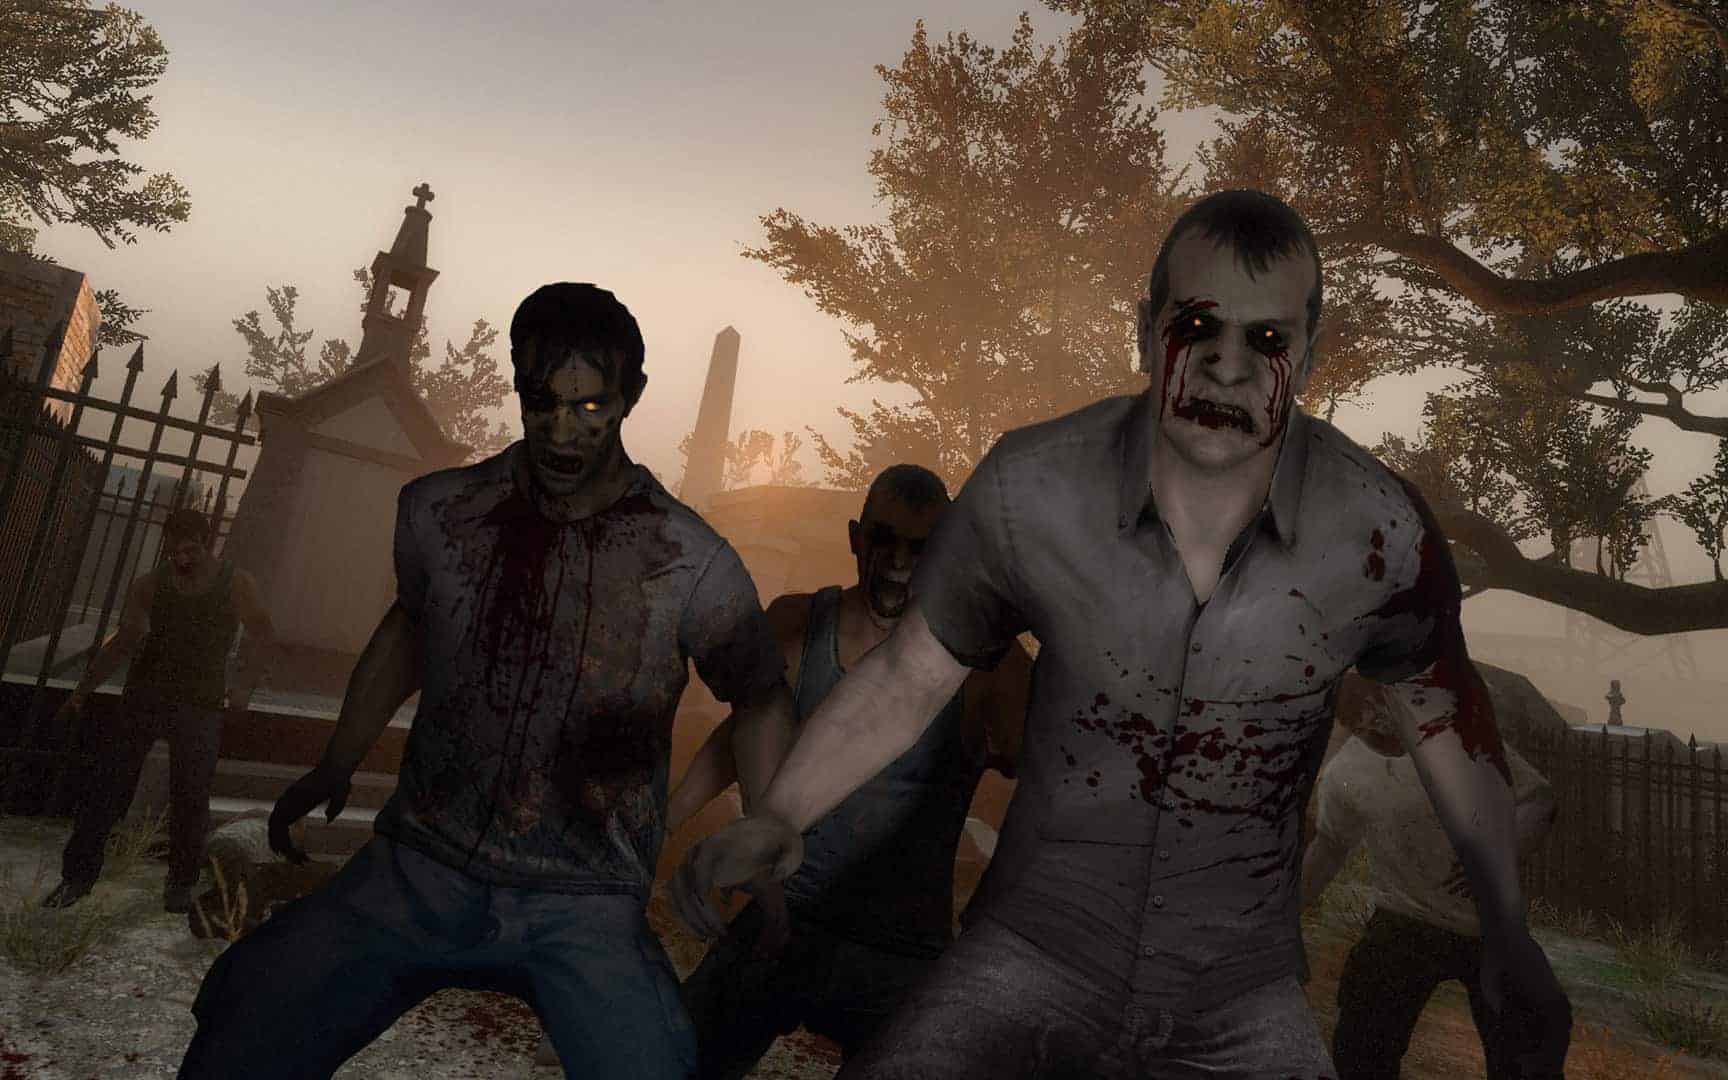 left for dead 2 download free full version pc